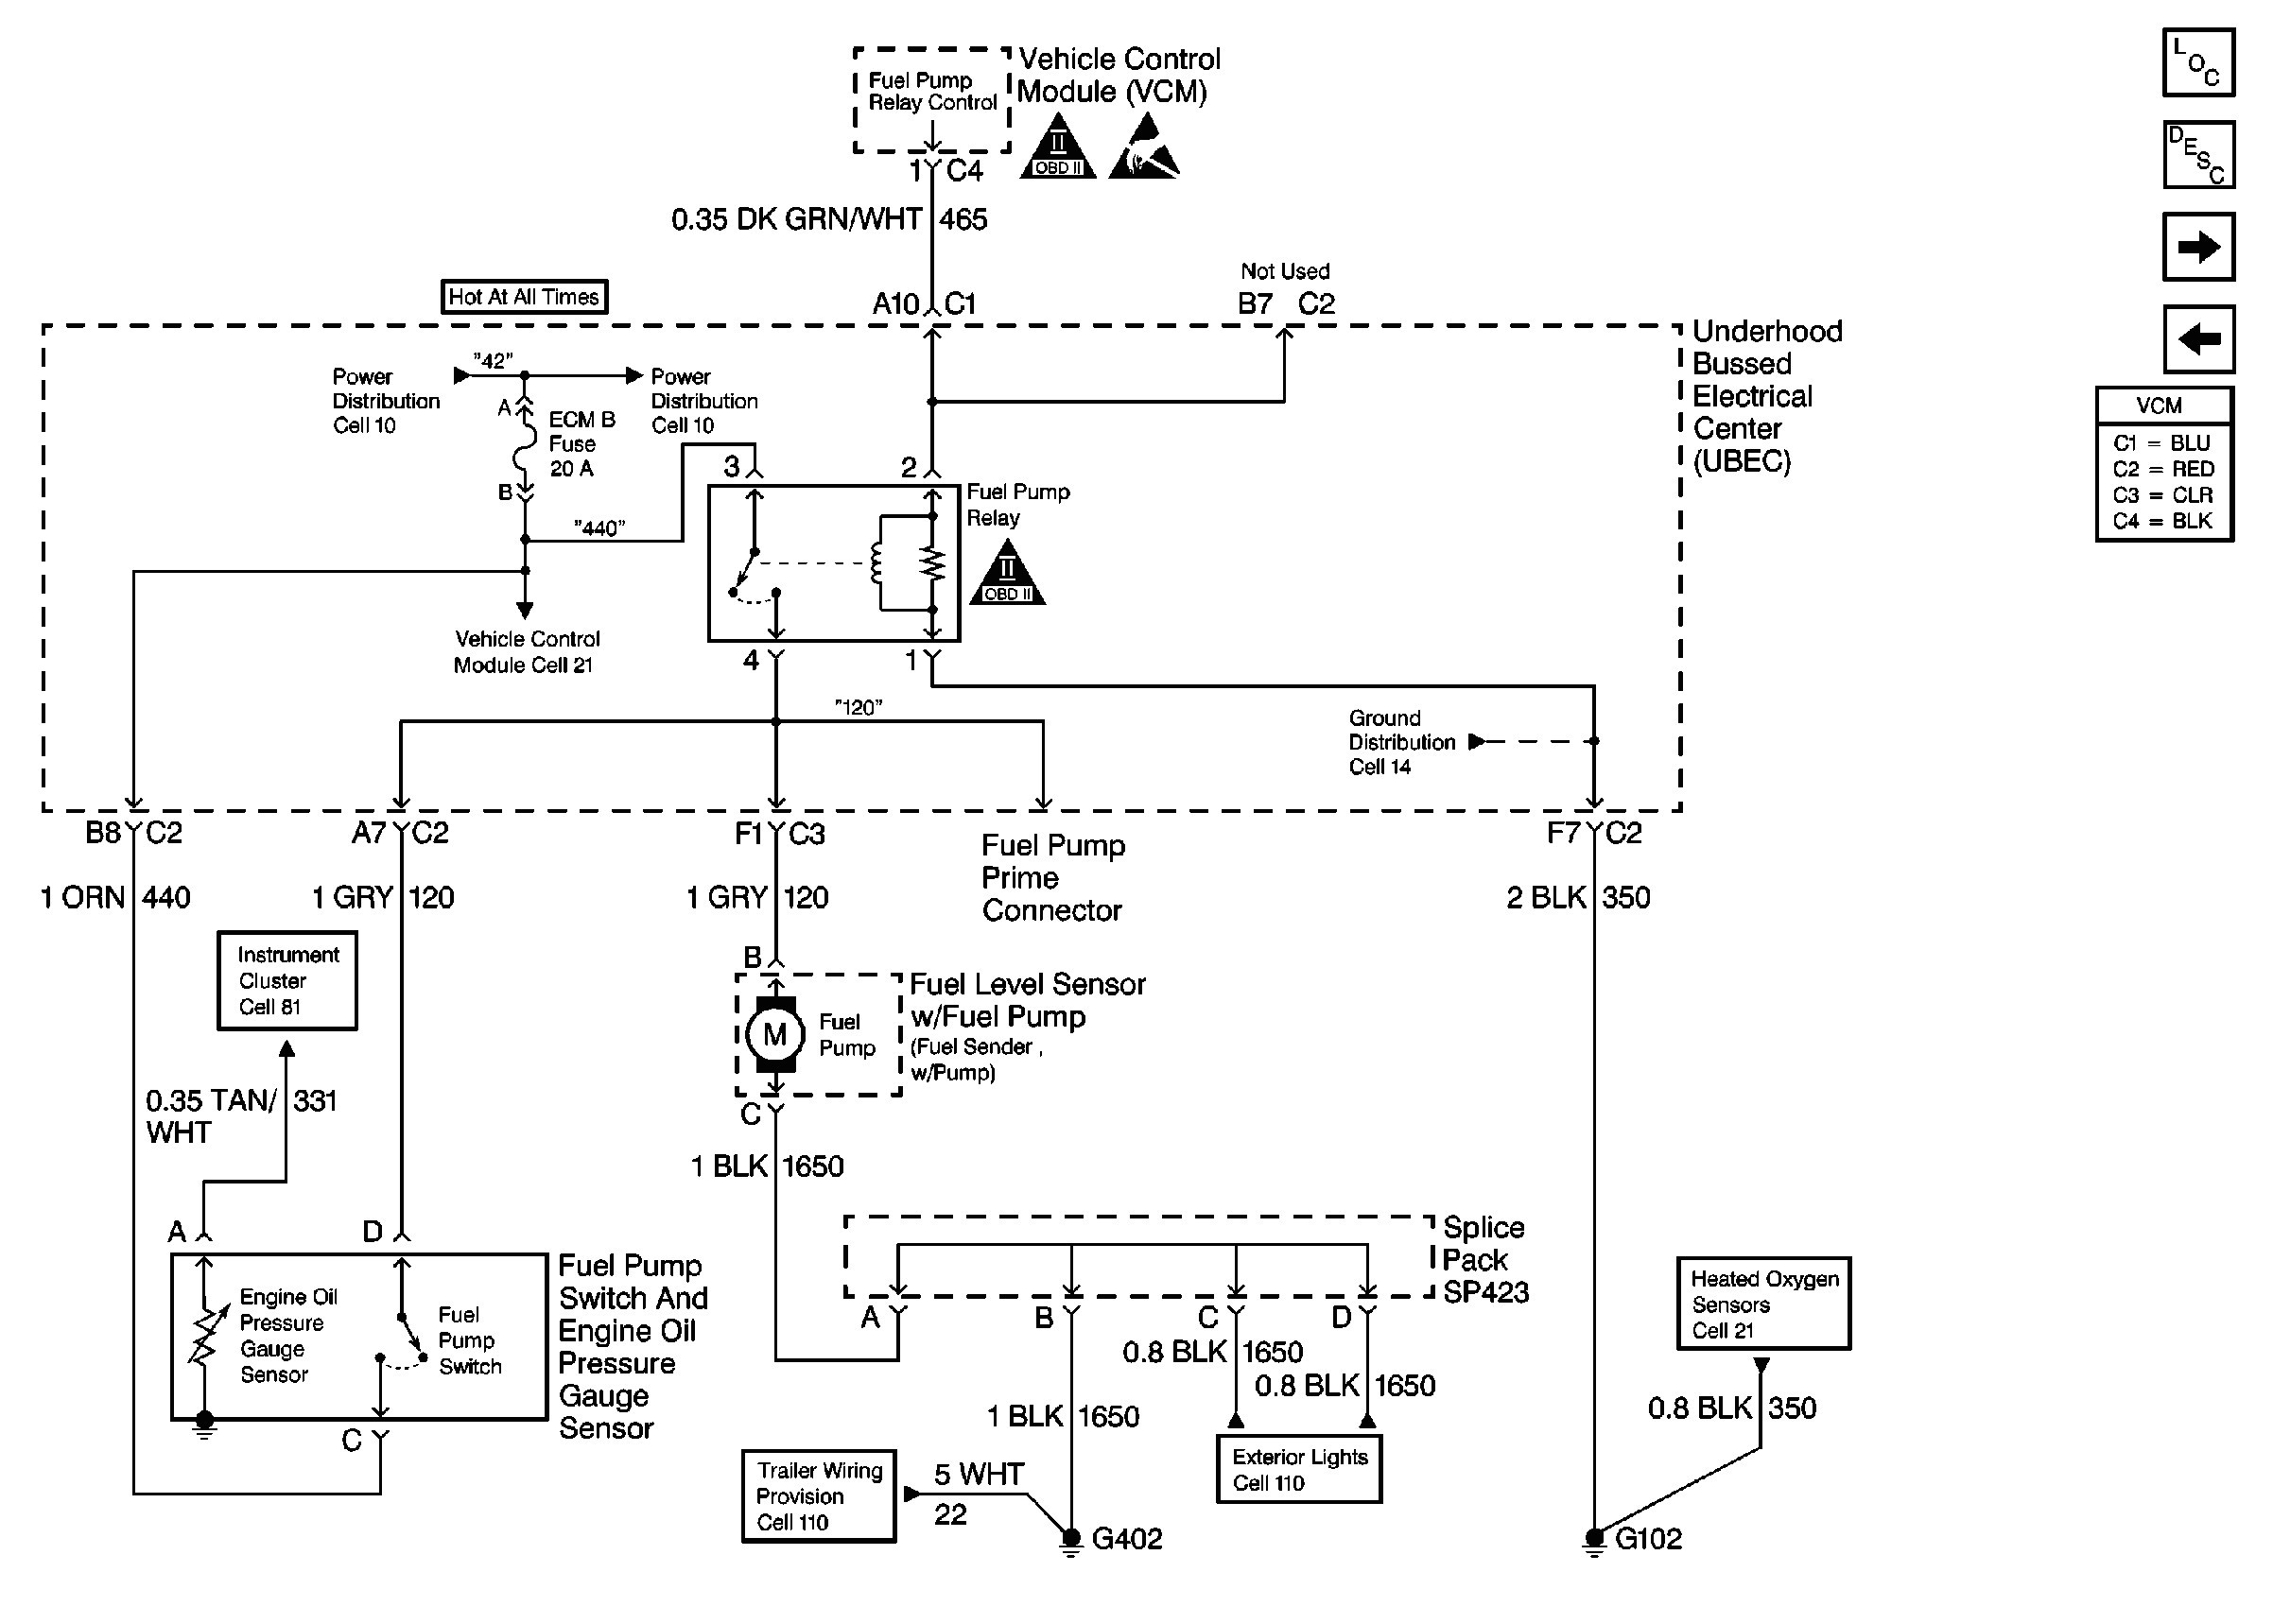 Engine Test Stand Wiring Diagram Awesome Fuel Pump Wiring Harness Diagram Diagram Of Engine Test Stand Wiring Diagram